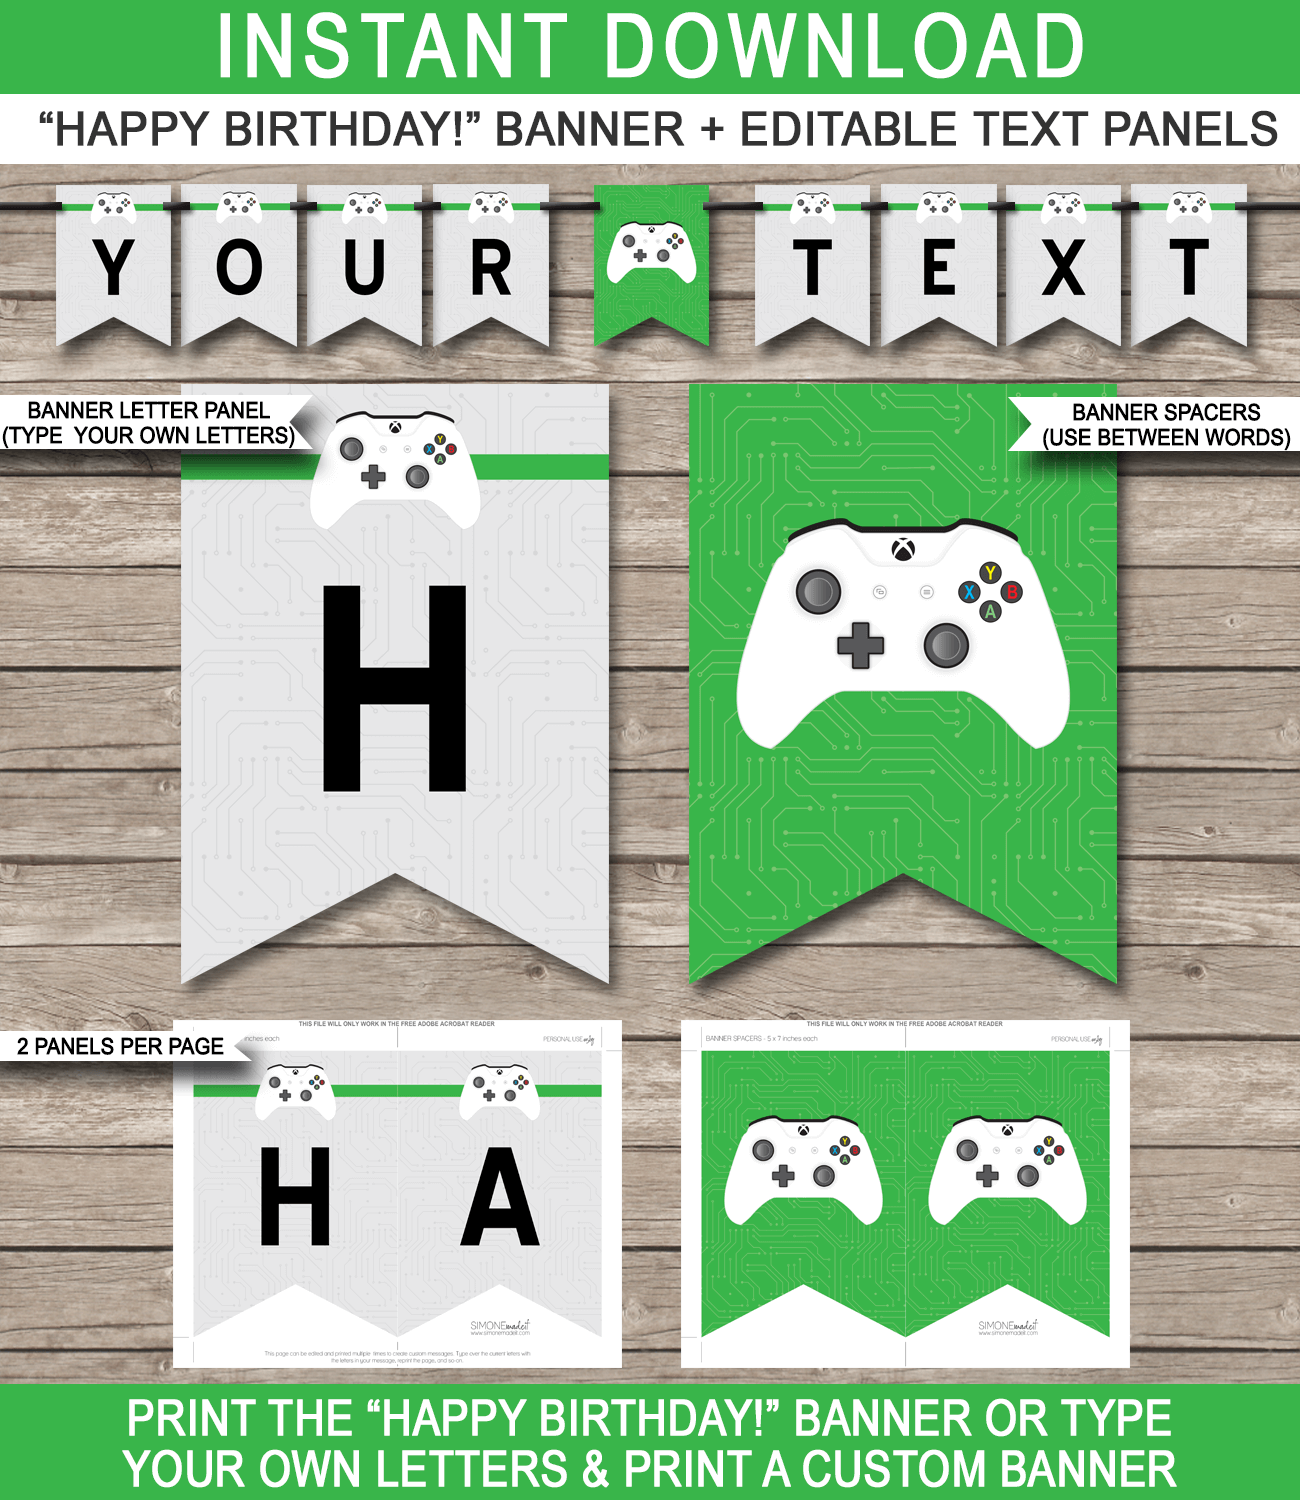 Xbox Party Pennant Banner Template | Video Game Theme Happy Birthday Banner | Custom Banner | DIY Editable & Printable Template | Instant Download via simonemadeit.com